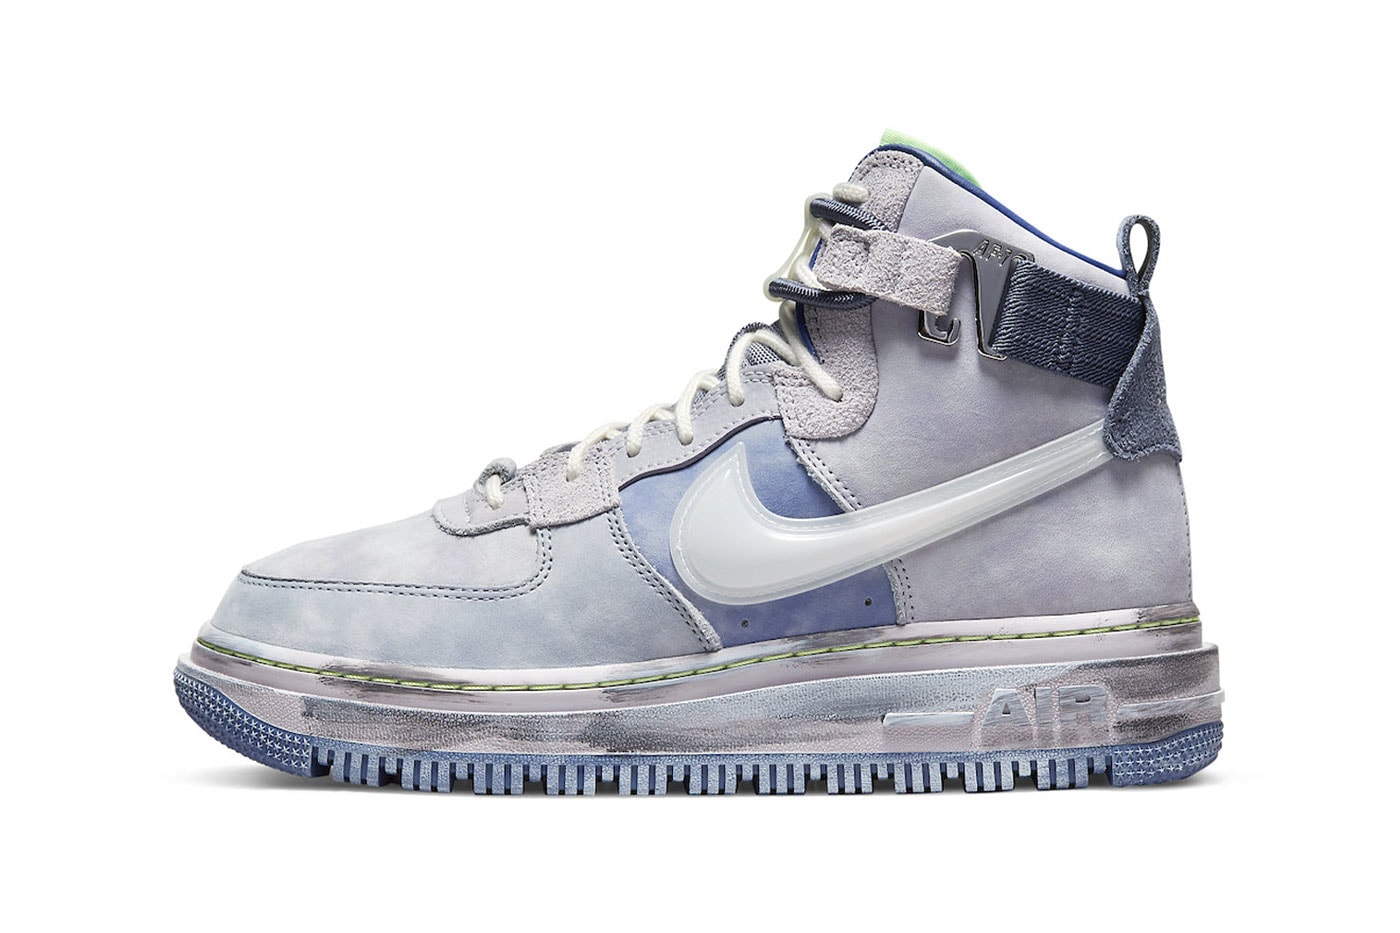 Nike Air Force 1 High Utility 2.0 in "Deep Freeze" Release Date footwear sneakers suede leather icy blue grey white